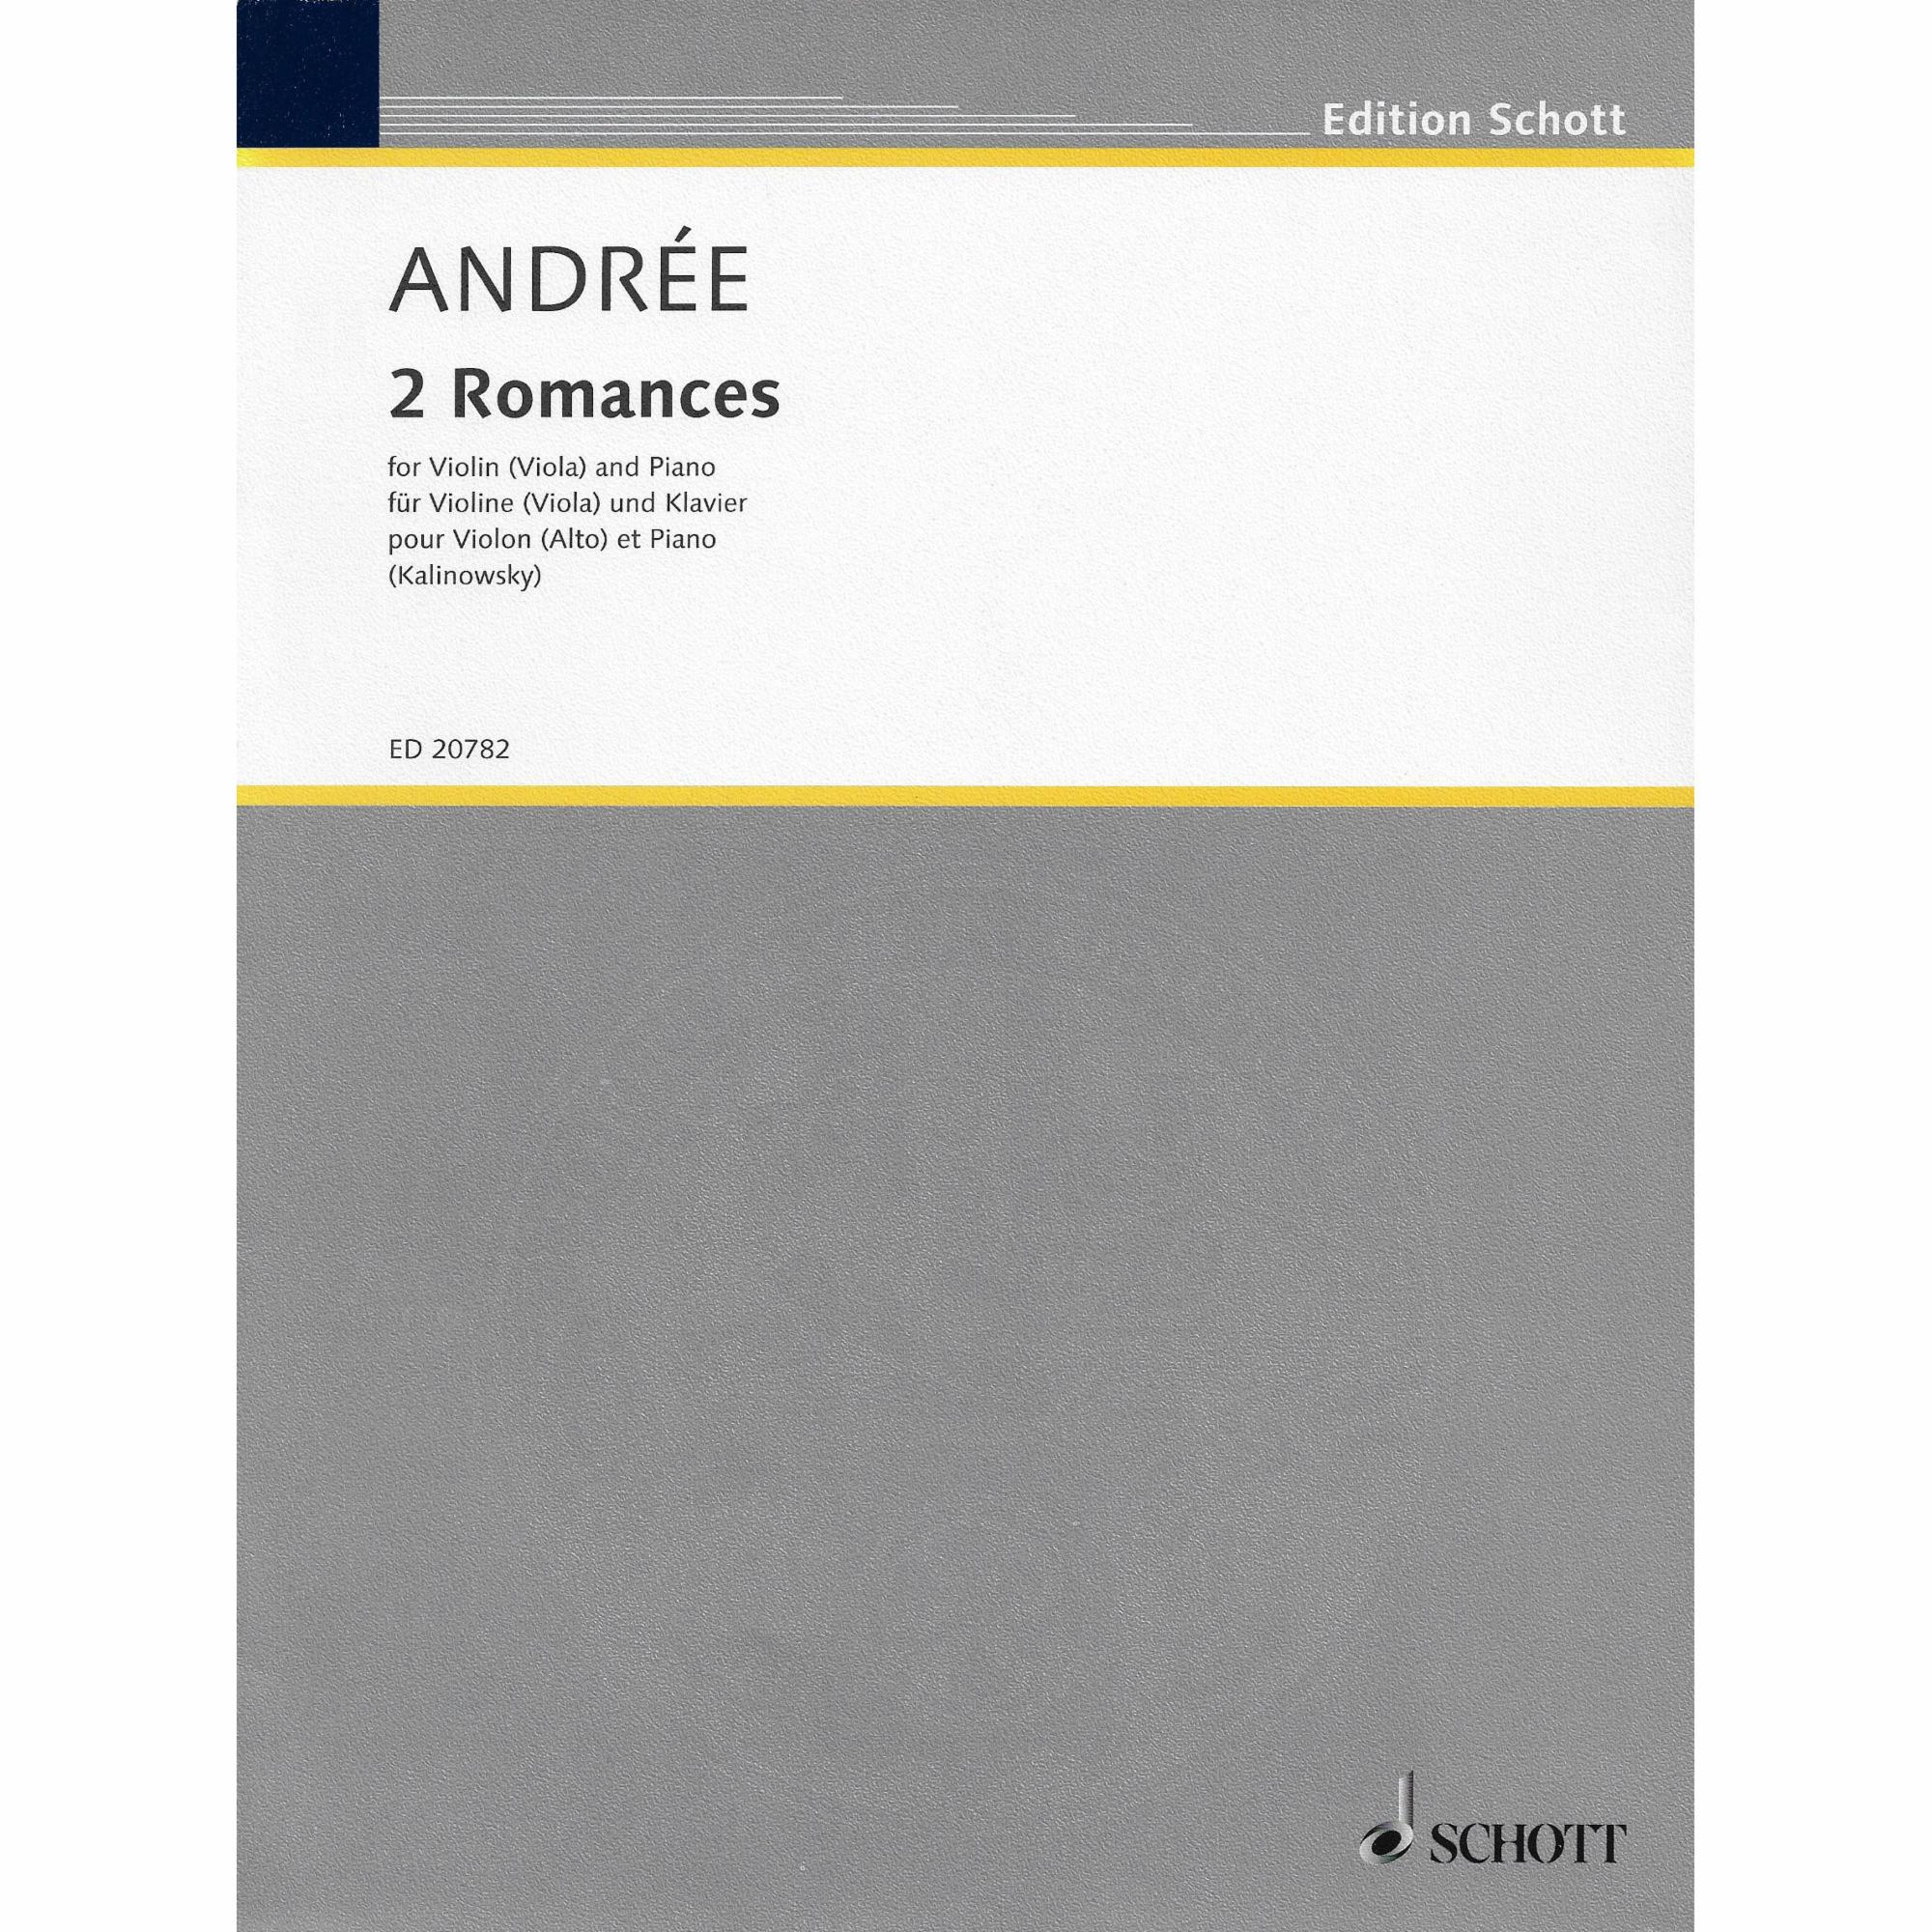 Andree -- 2 Romances for Violin or Viola and Piano